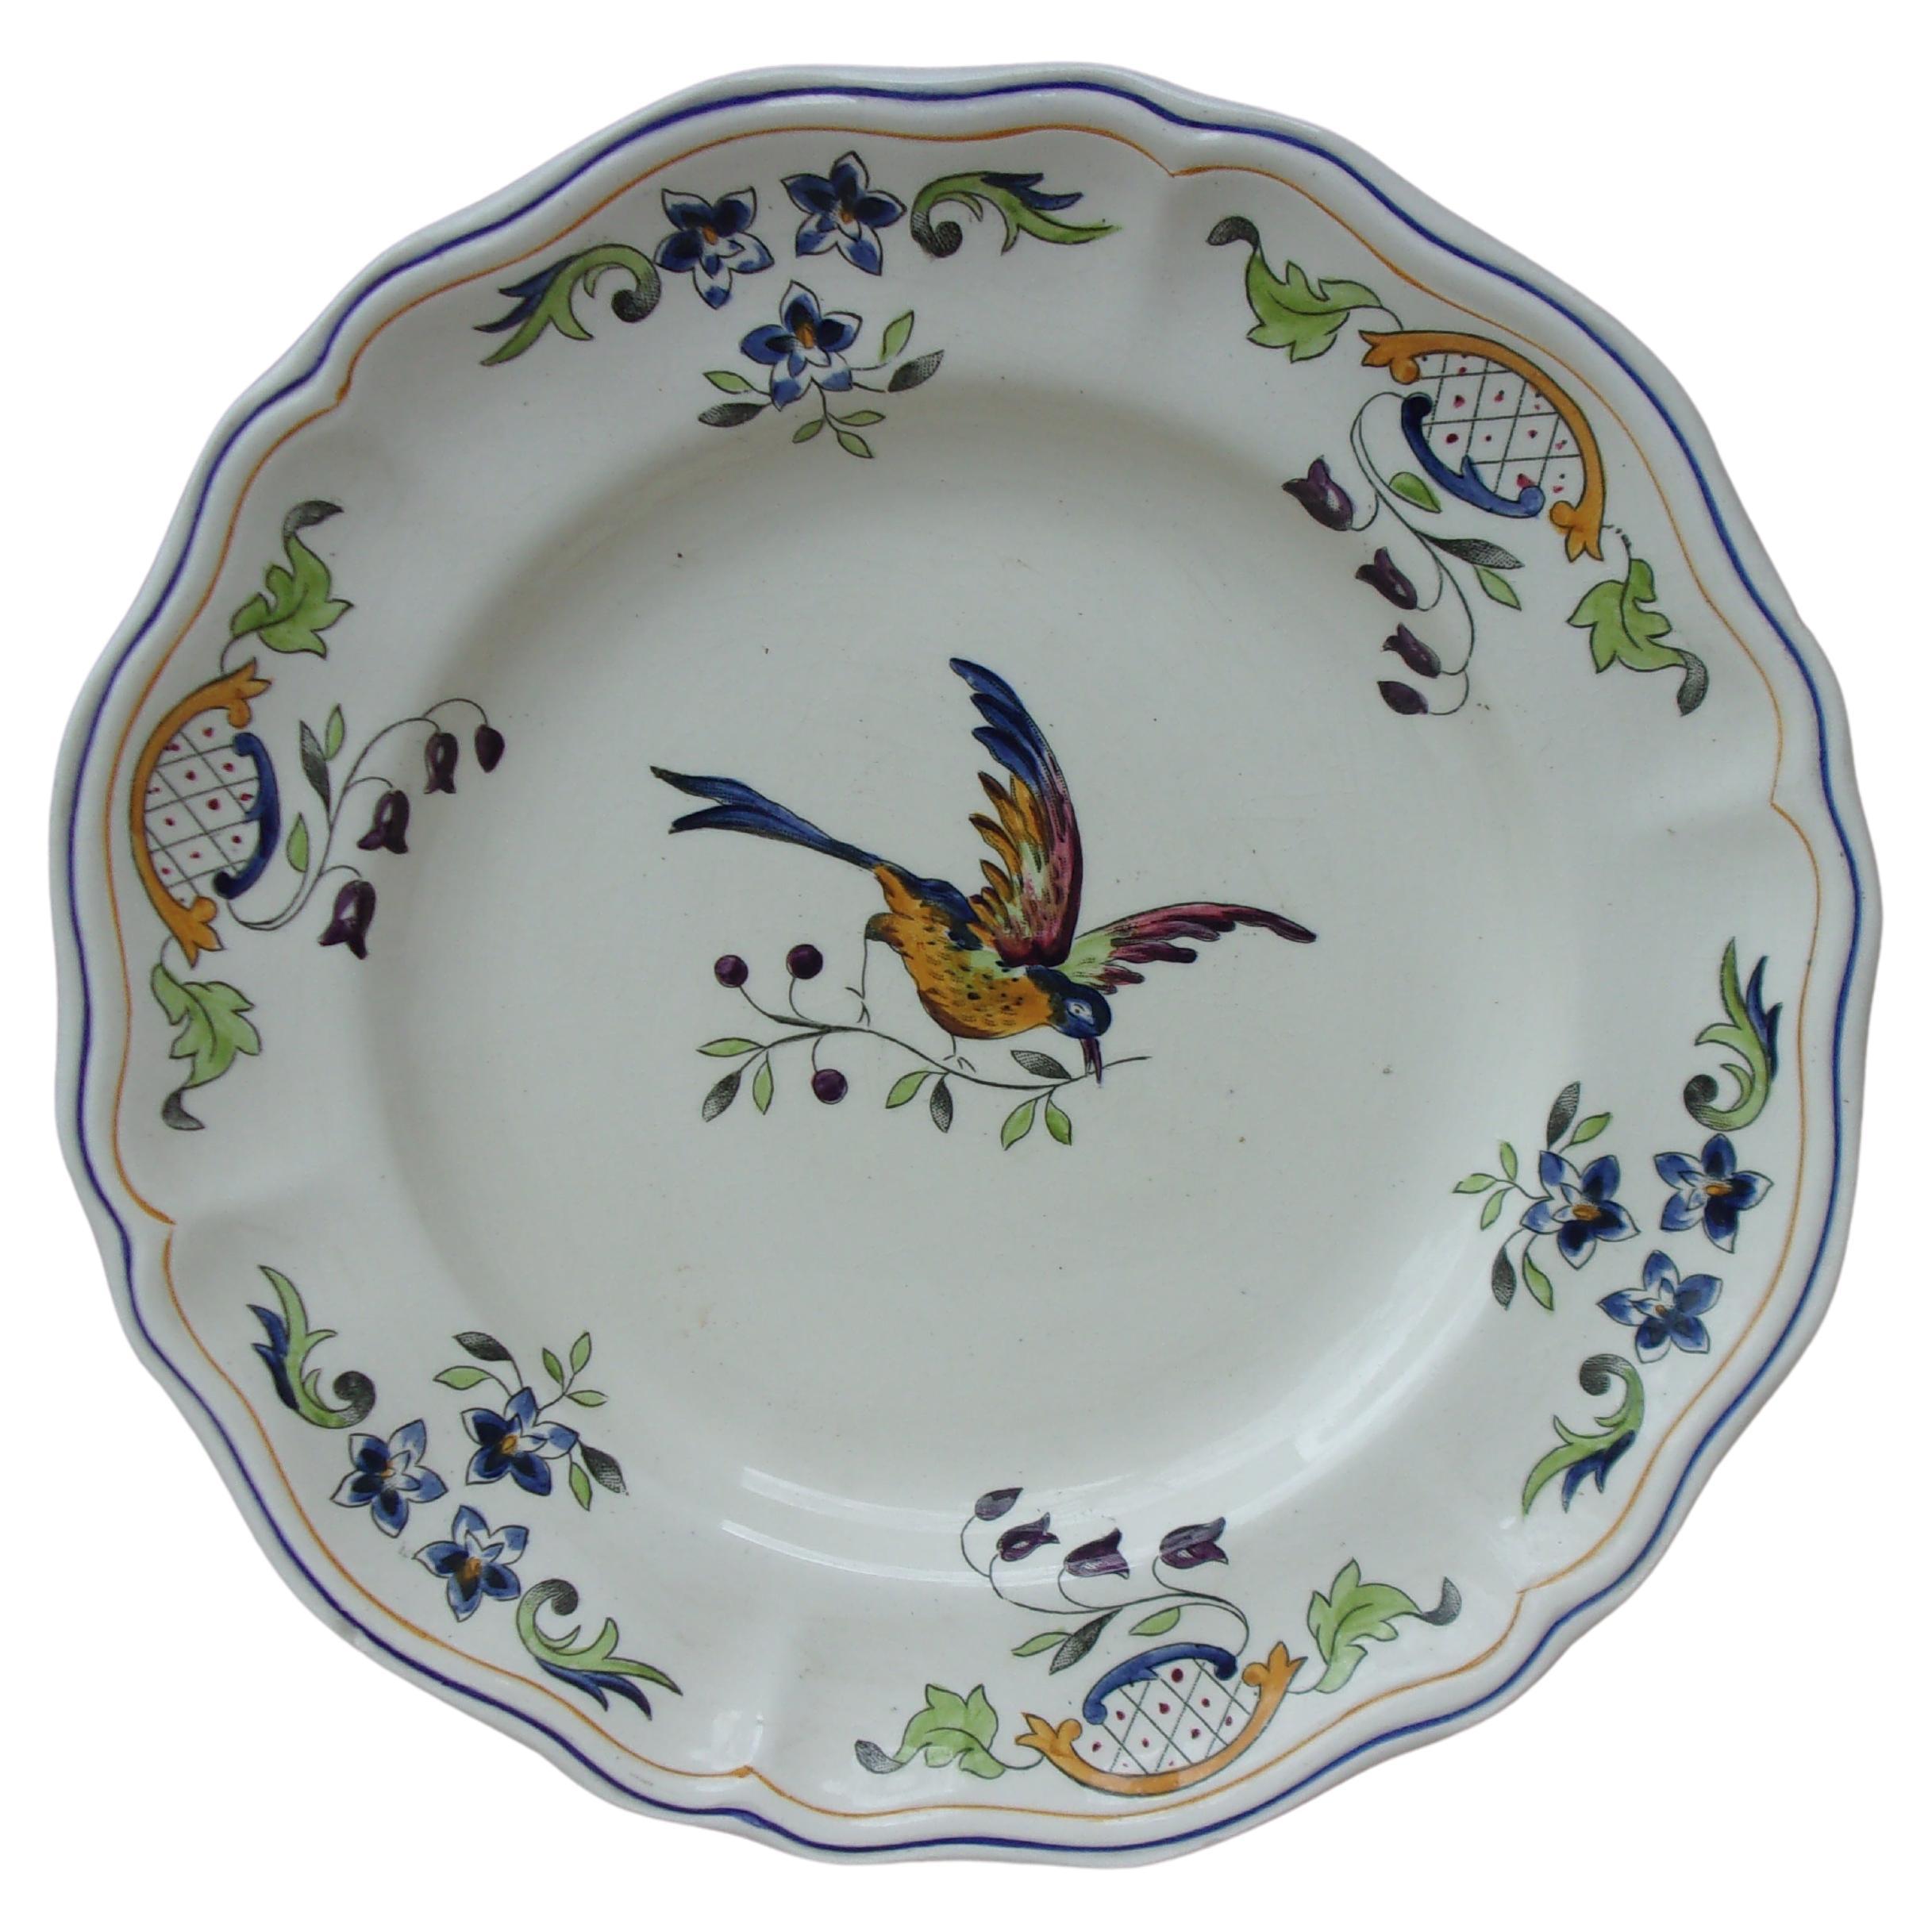 Large French Plate with Bird Longchamp Model Clery circa 1930